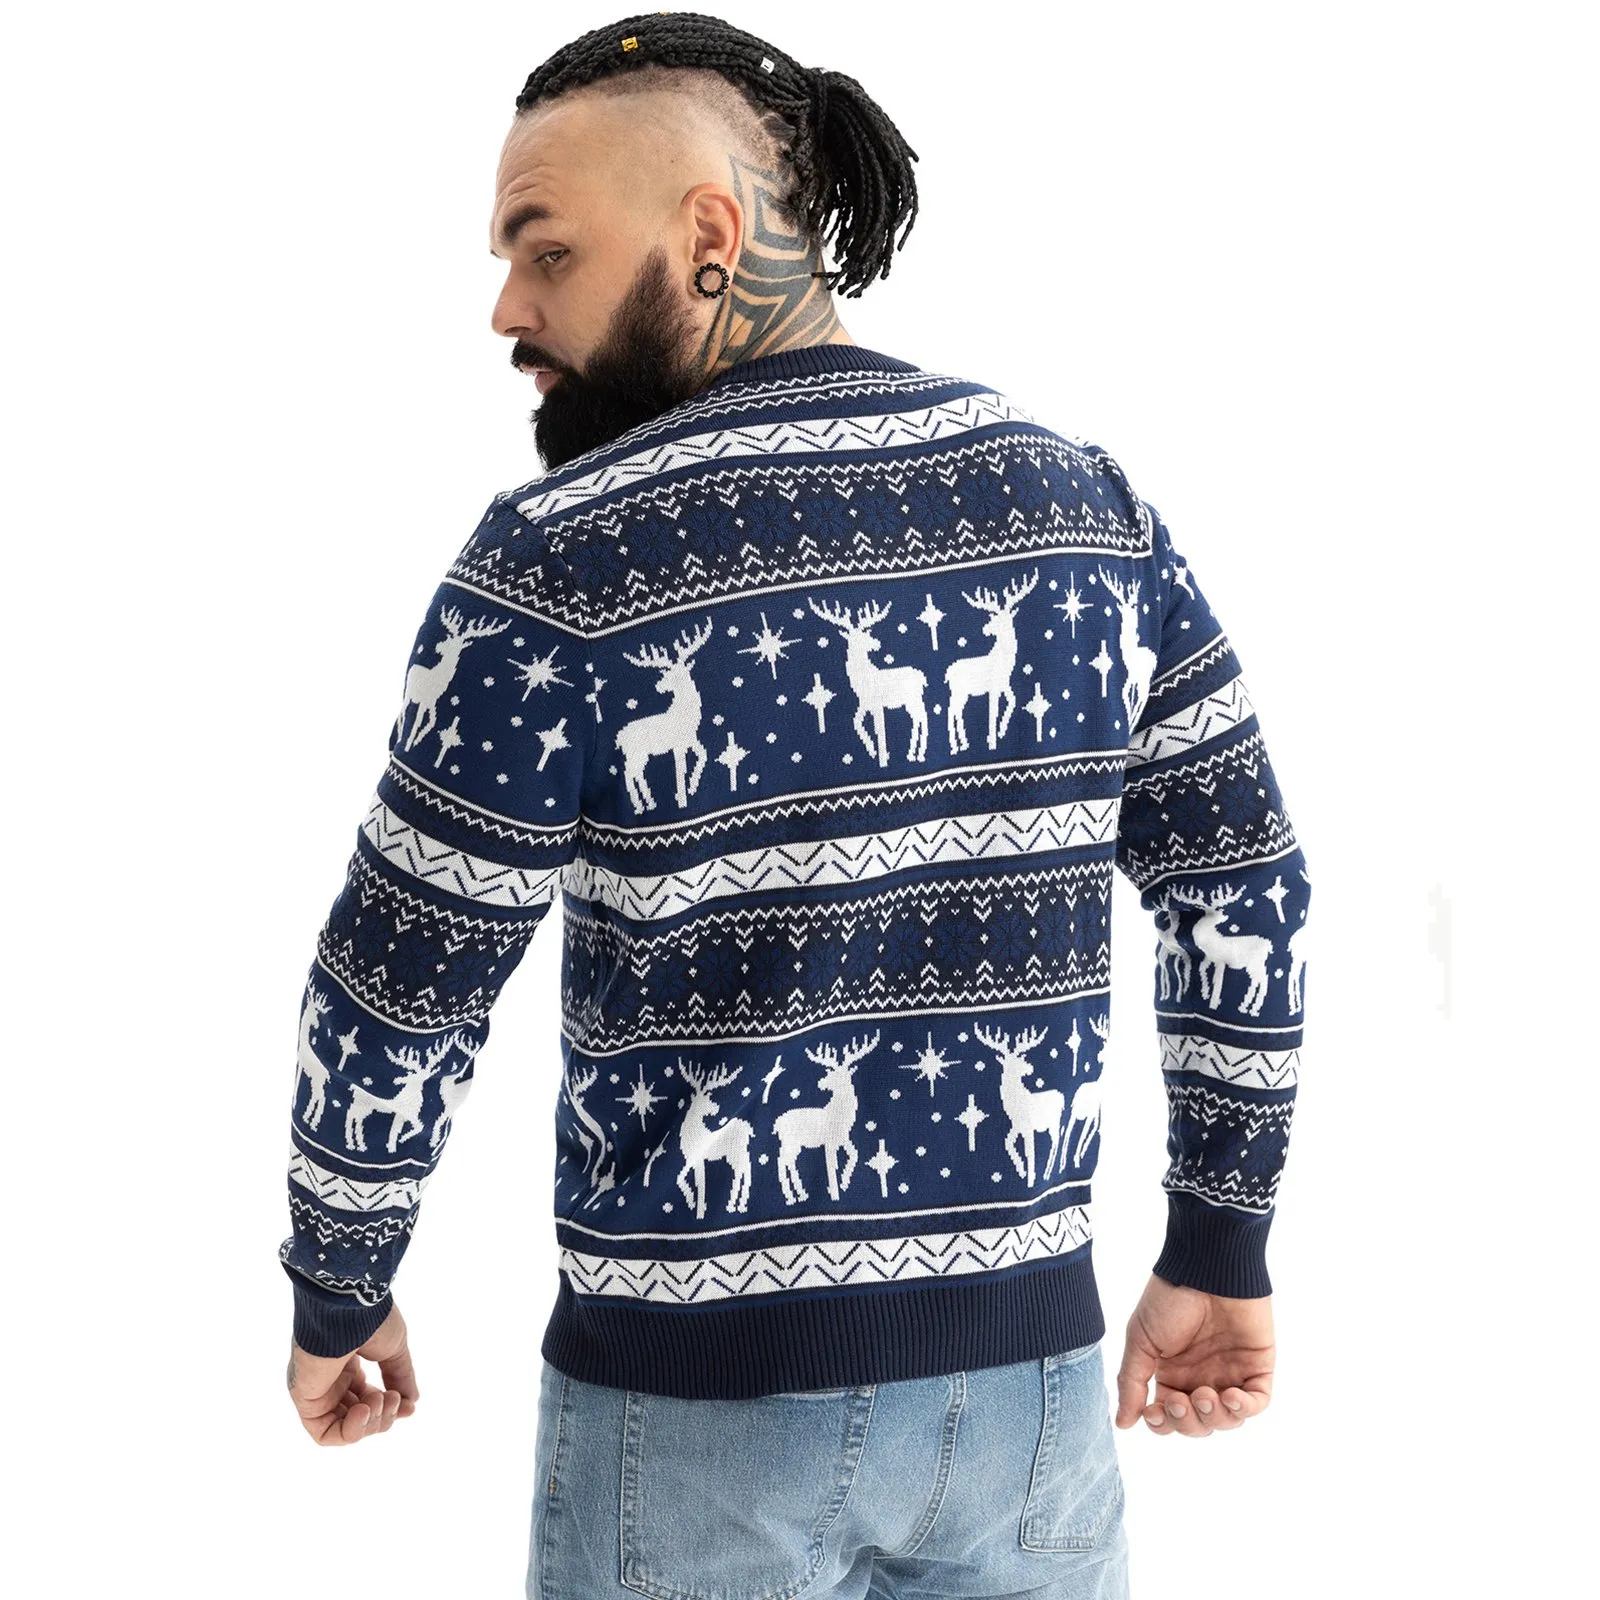 Reindeer on Repeat Mens Funny Christmas Sweater  Blue